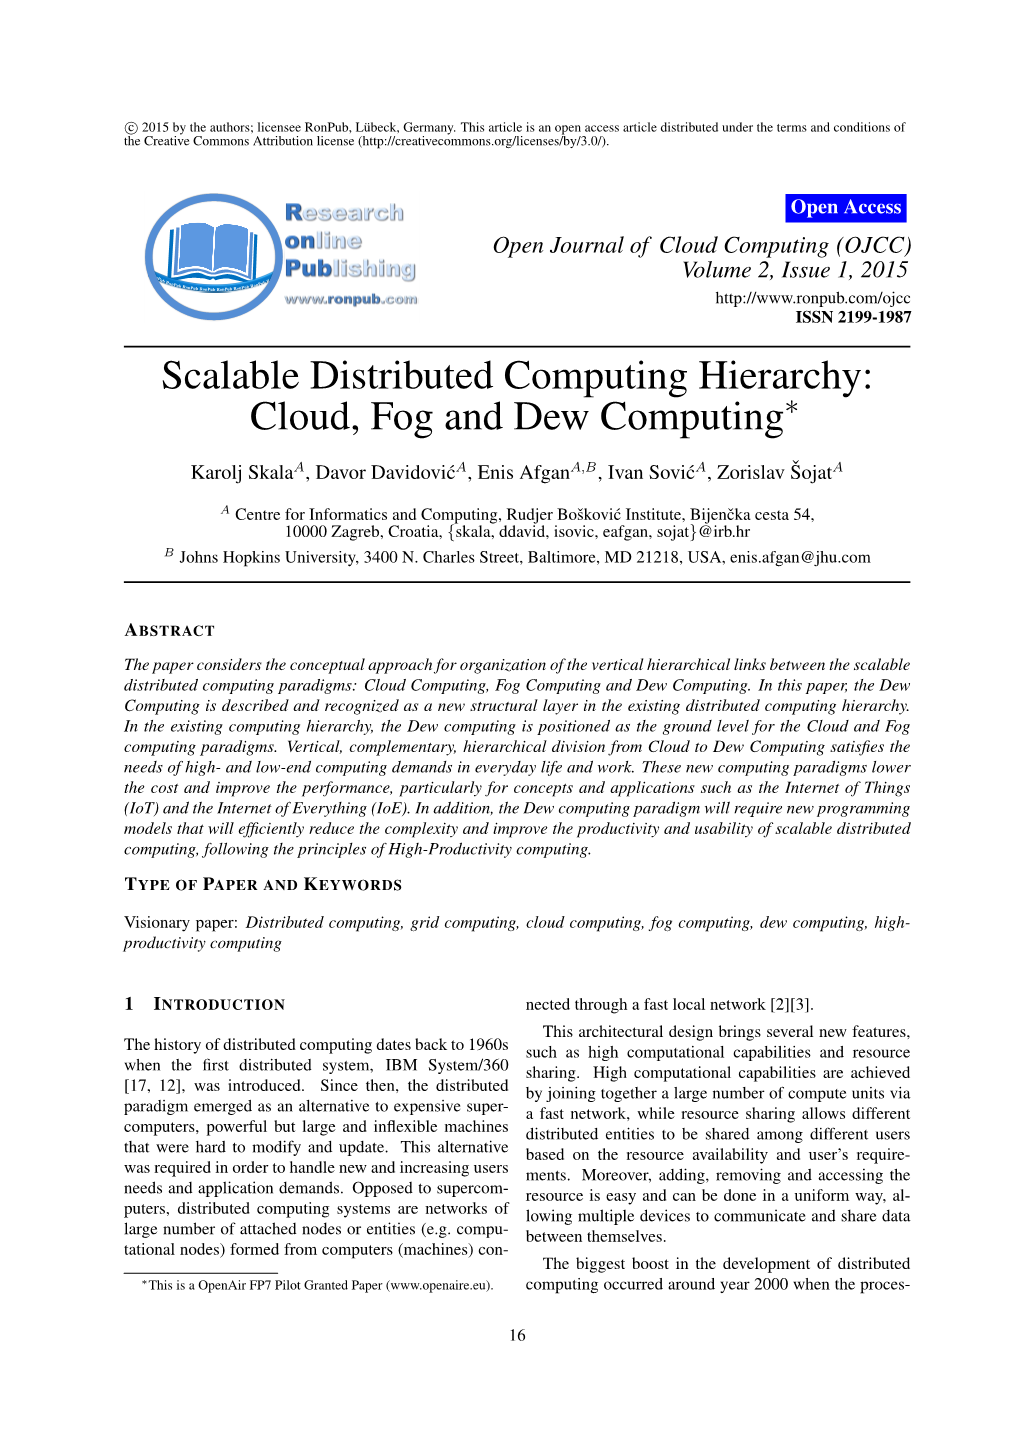 Scalable Distributed Computing Hierarchy: Cloud, Fog and Dew Computing∗